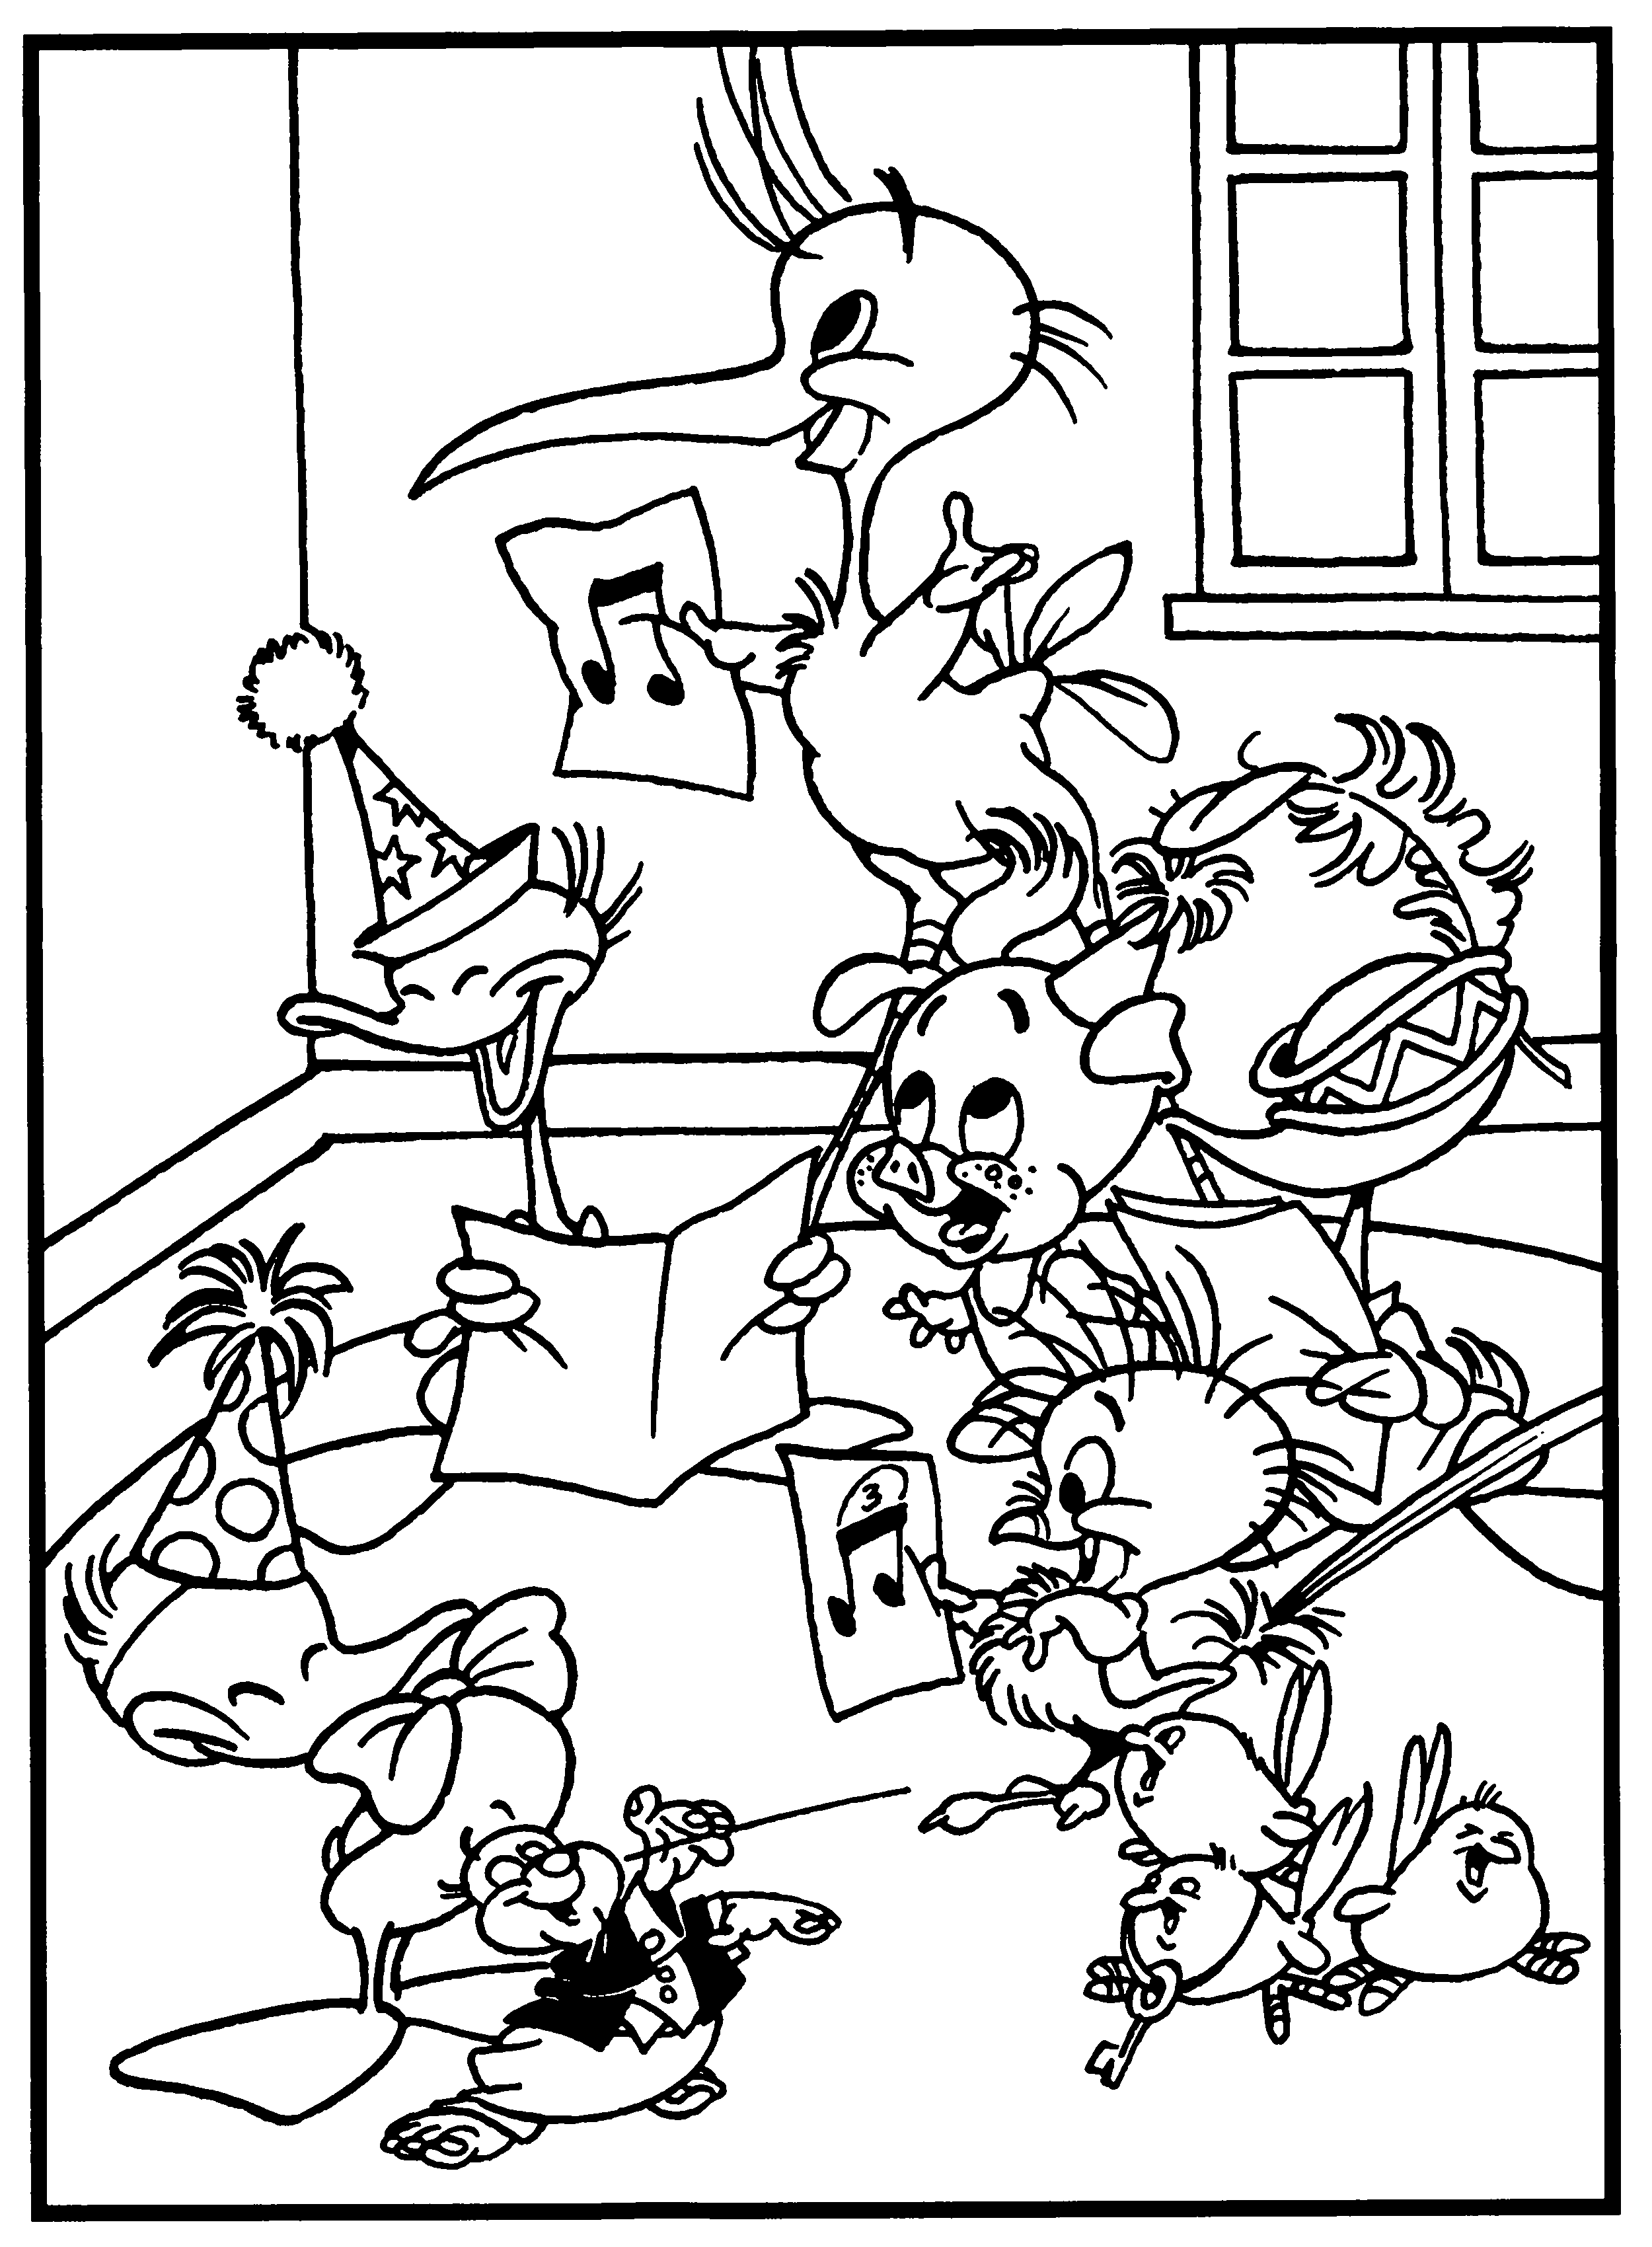 Alfred j kwak coloring pages